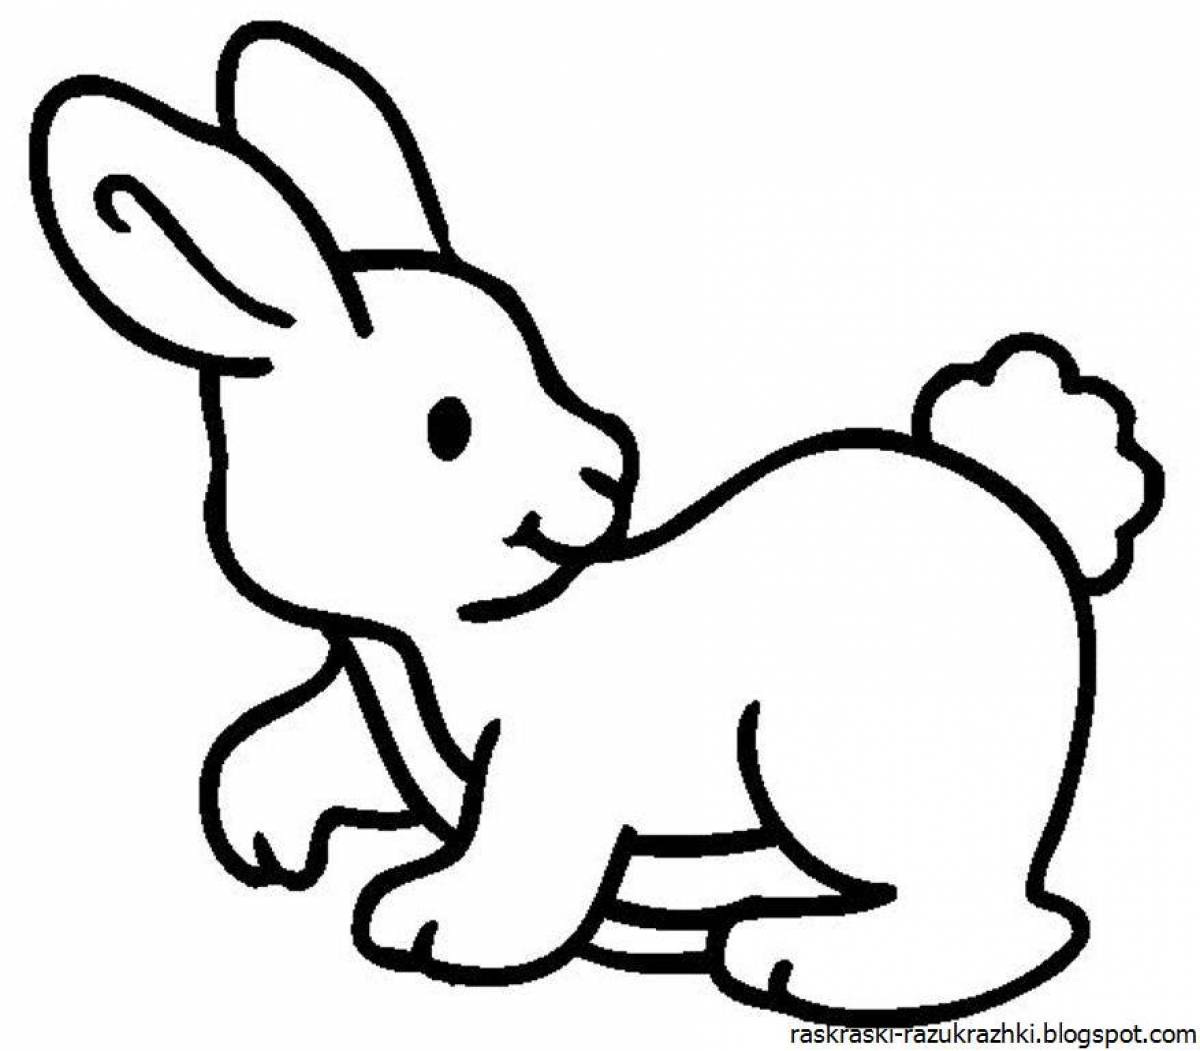 Glamorous rabbit coloring book for children 3-4 years old